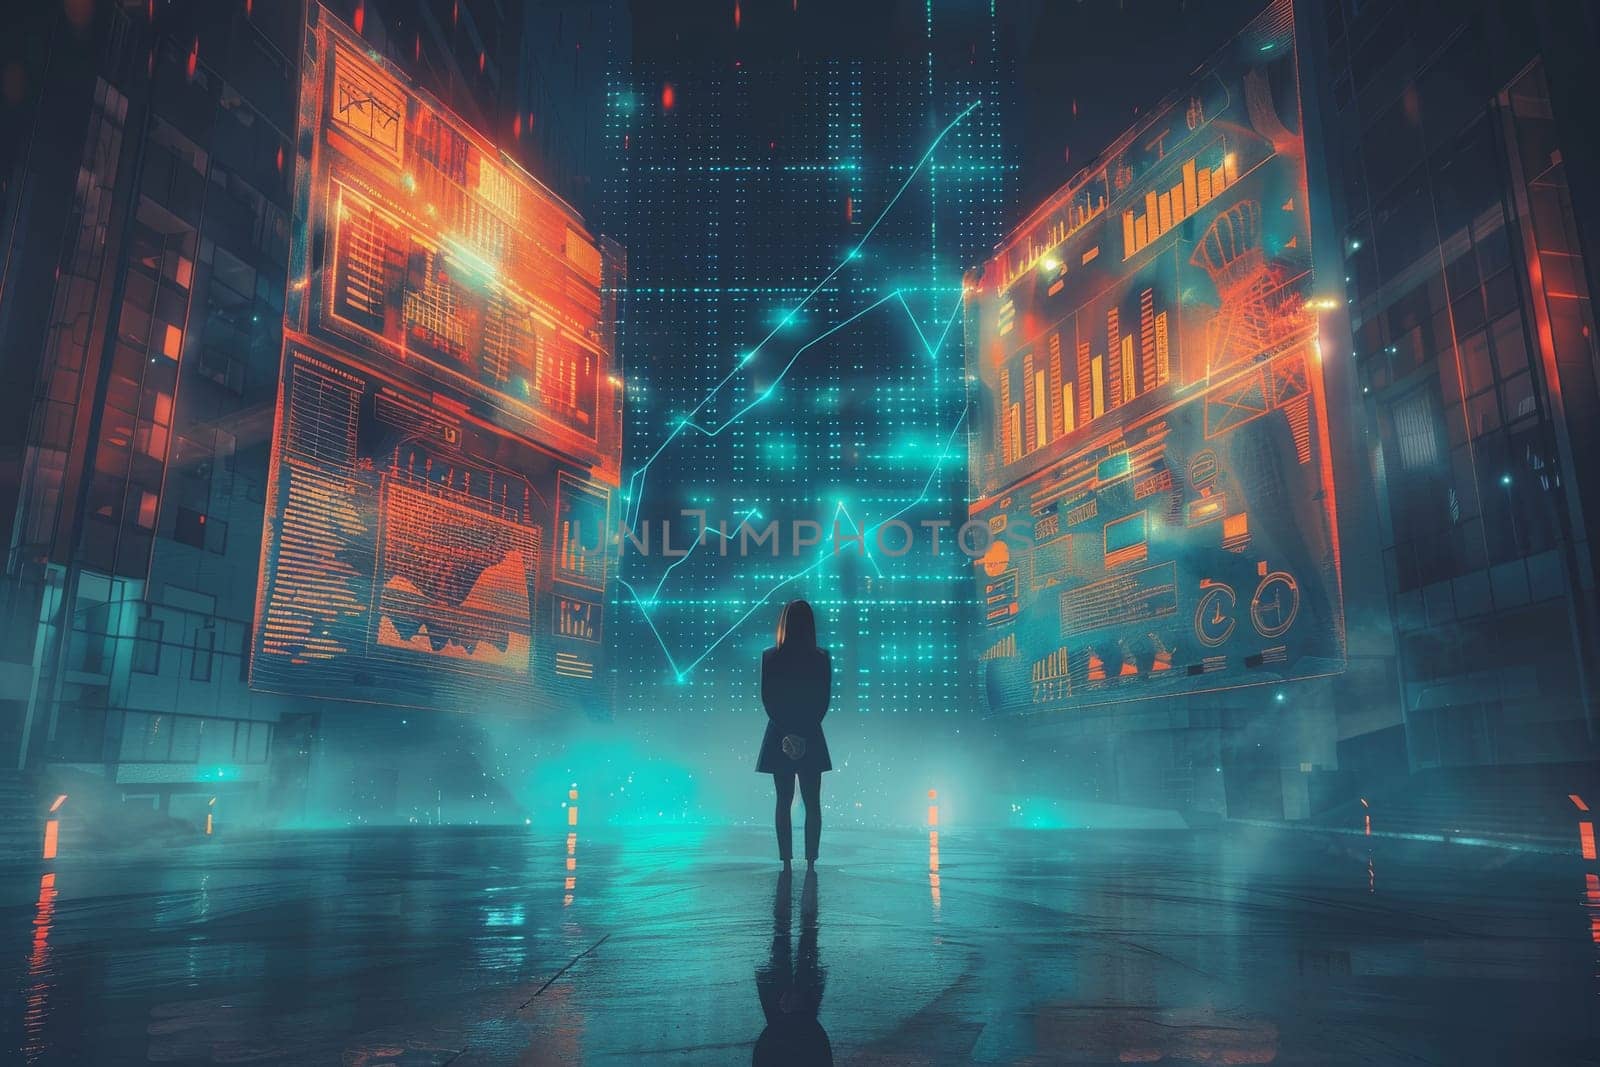 A woman stands in front of two computer monitors, one of which is displaying a graph. The scene is set in a futuristic city